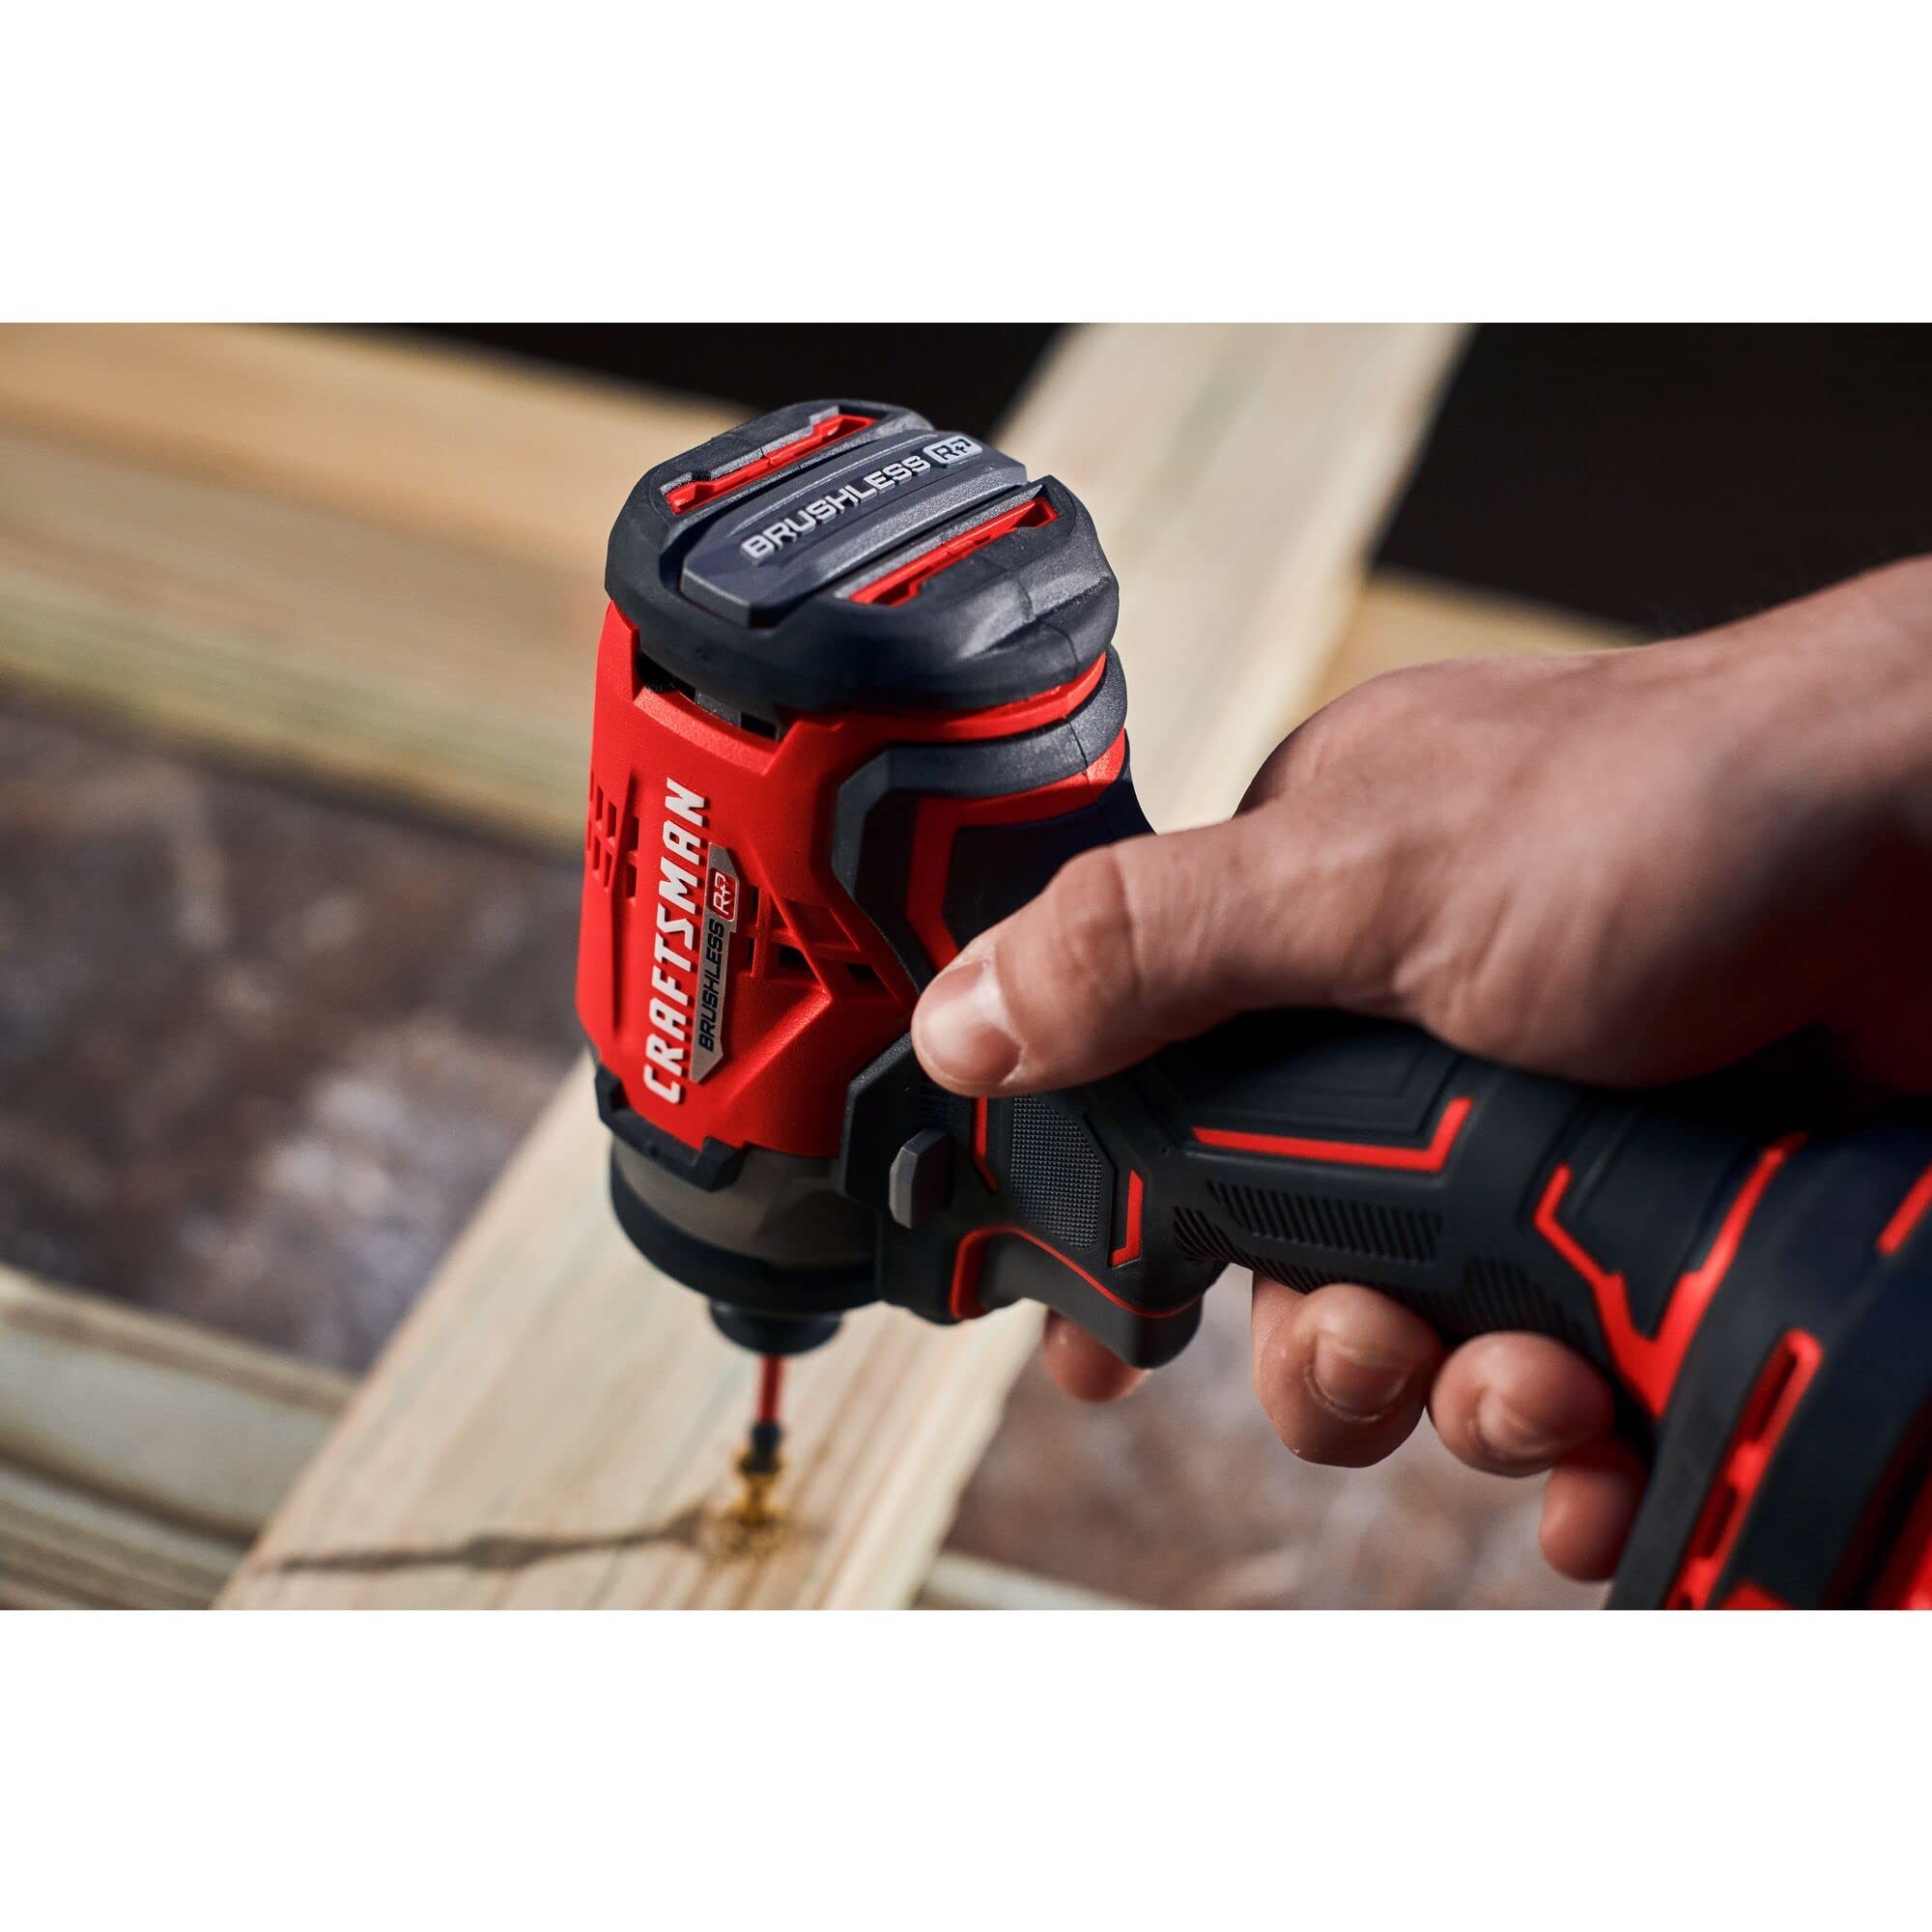 CRAFTSMAN V20 RP Cordless Drill and Impact Driver, Power Tool Combo Kit, 2 Batteries and Charger Included (CMCK211C2)